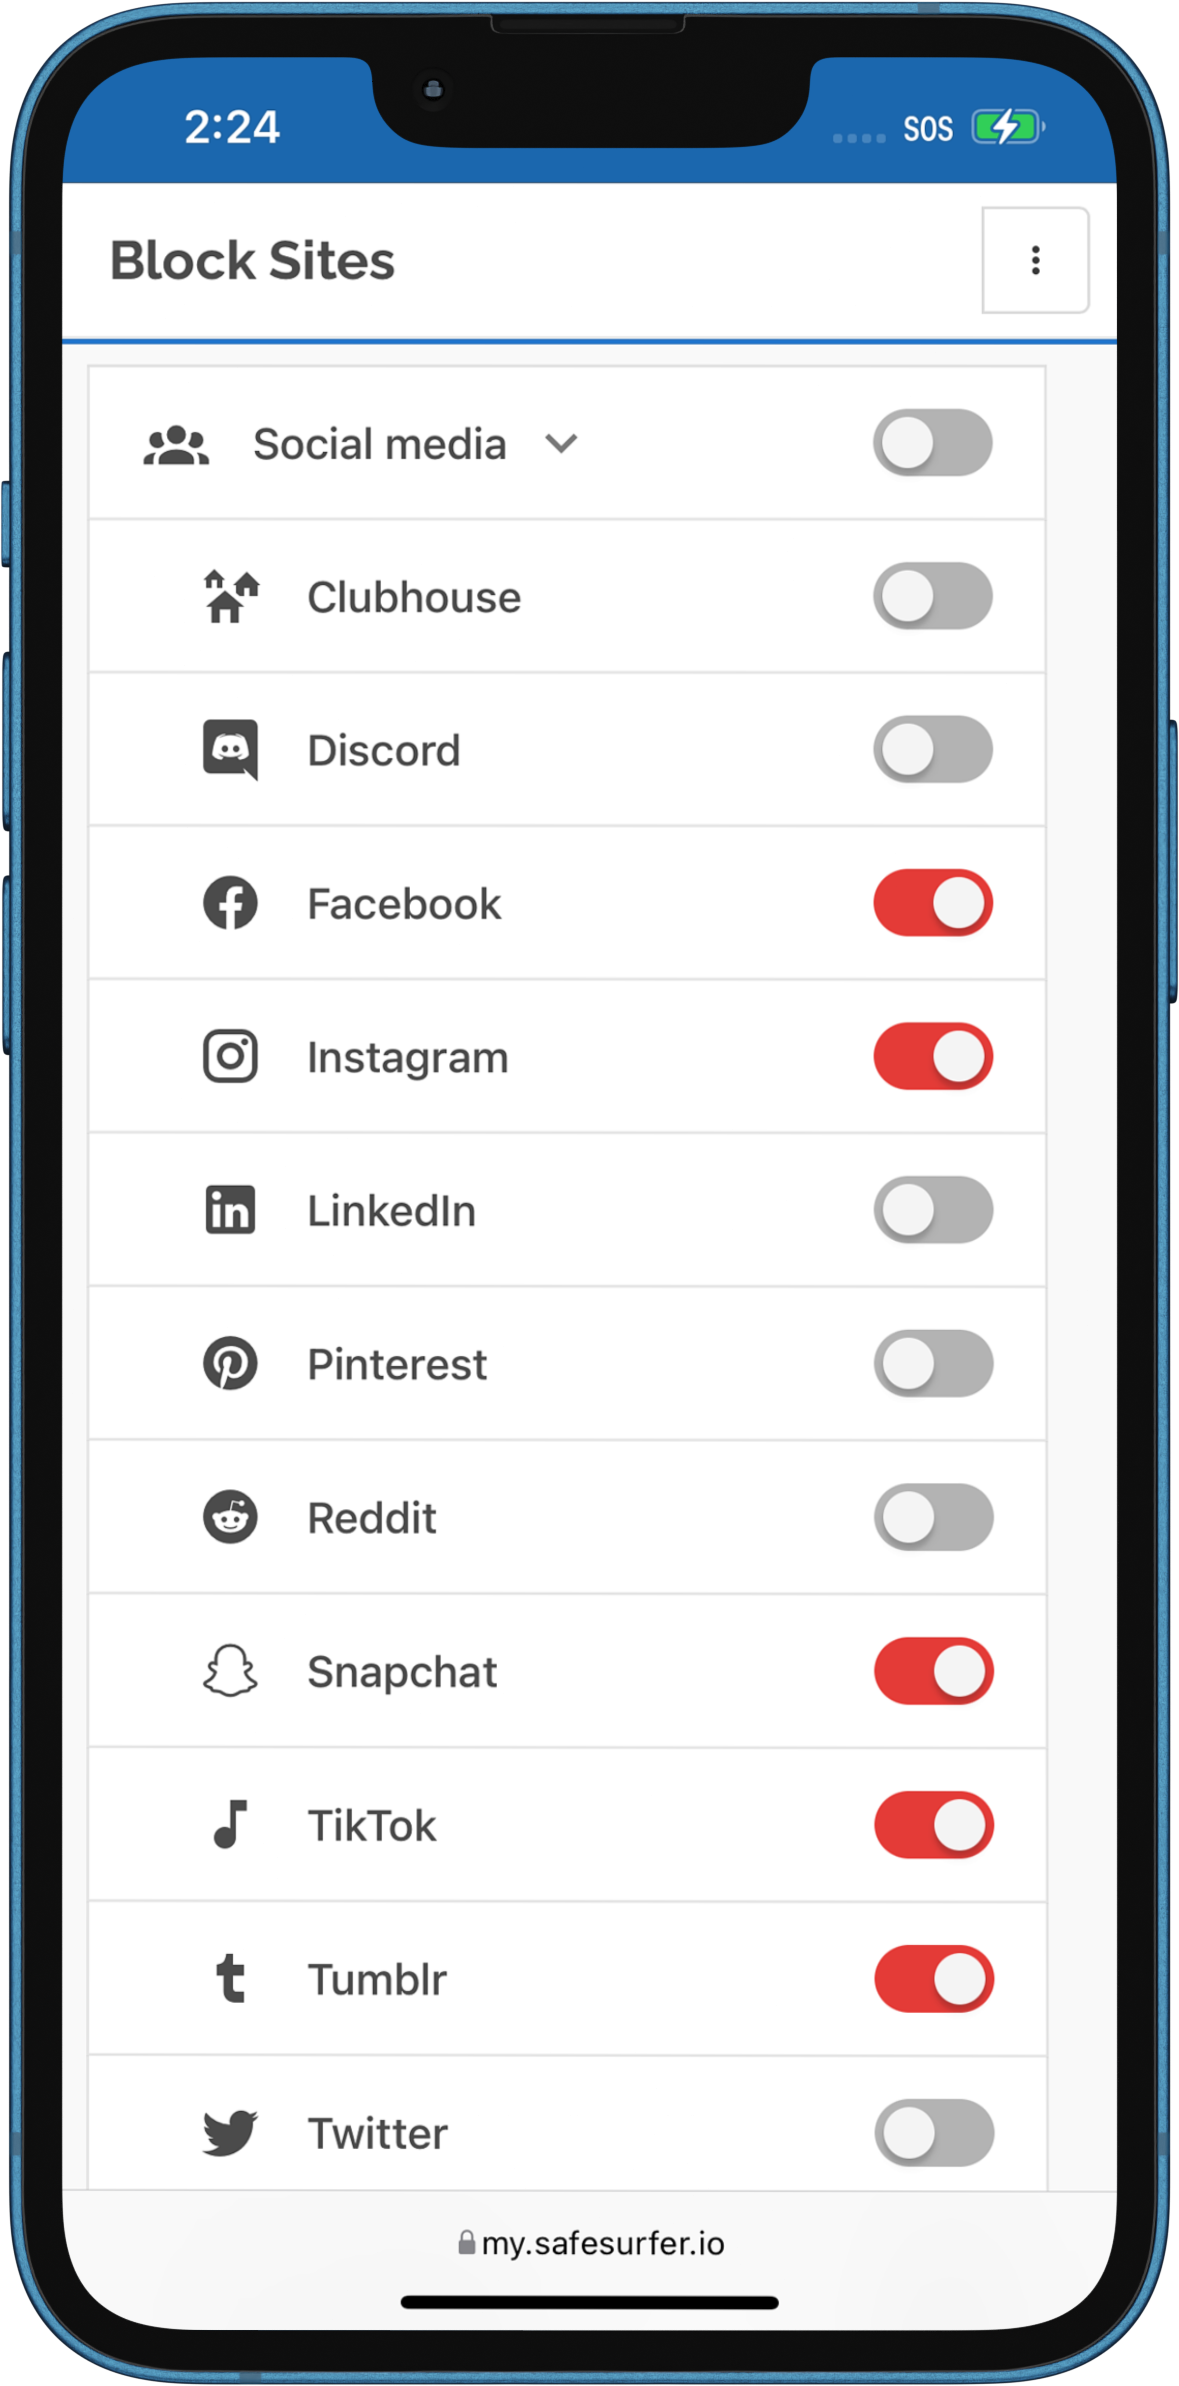 iPhone showing Safe Surfer block sites user interface, with toggles for Social Media, Clubhouse, Discord, Facebook, Instagram, LinkedIn, Pinterest, Reddit, Snapchat, TikTok, Tumblr, and Twitter